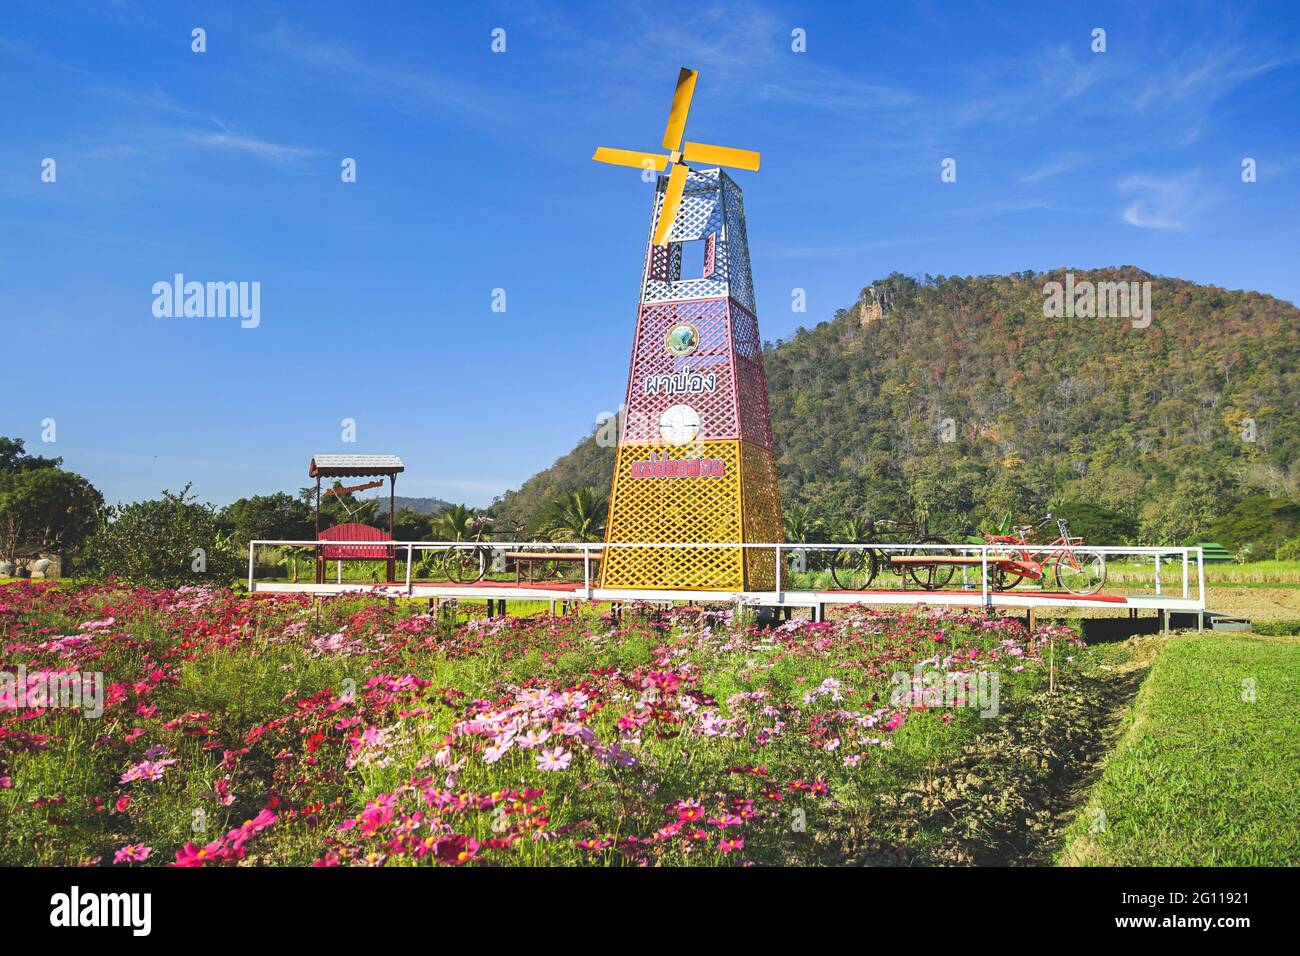 The famous travel destinations of Mae Hong Son Pha Bong Village in local Thai name is Sapankhao Kao Peu Sook. (Translation:Pha Bong Village in Mae Hon Stock Photo